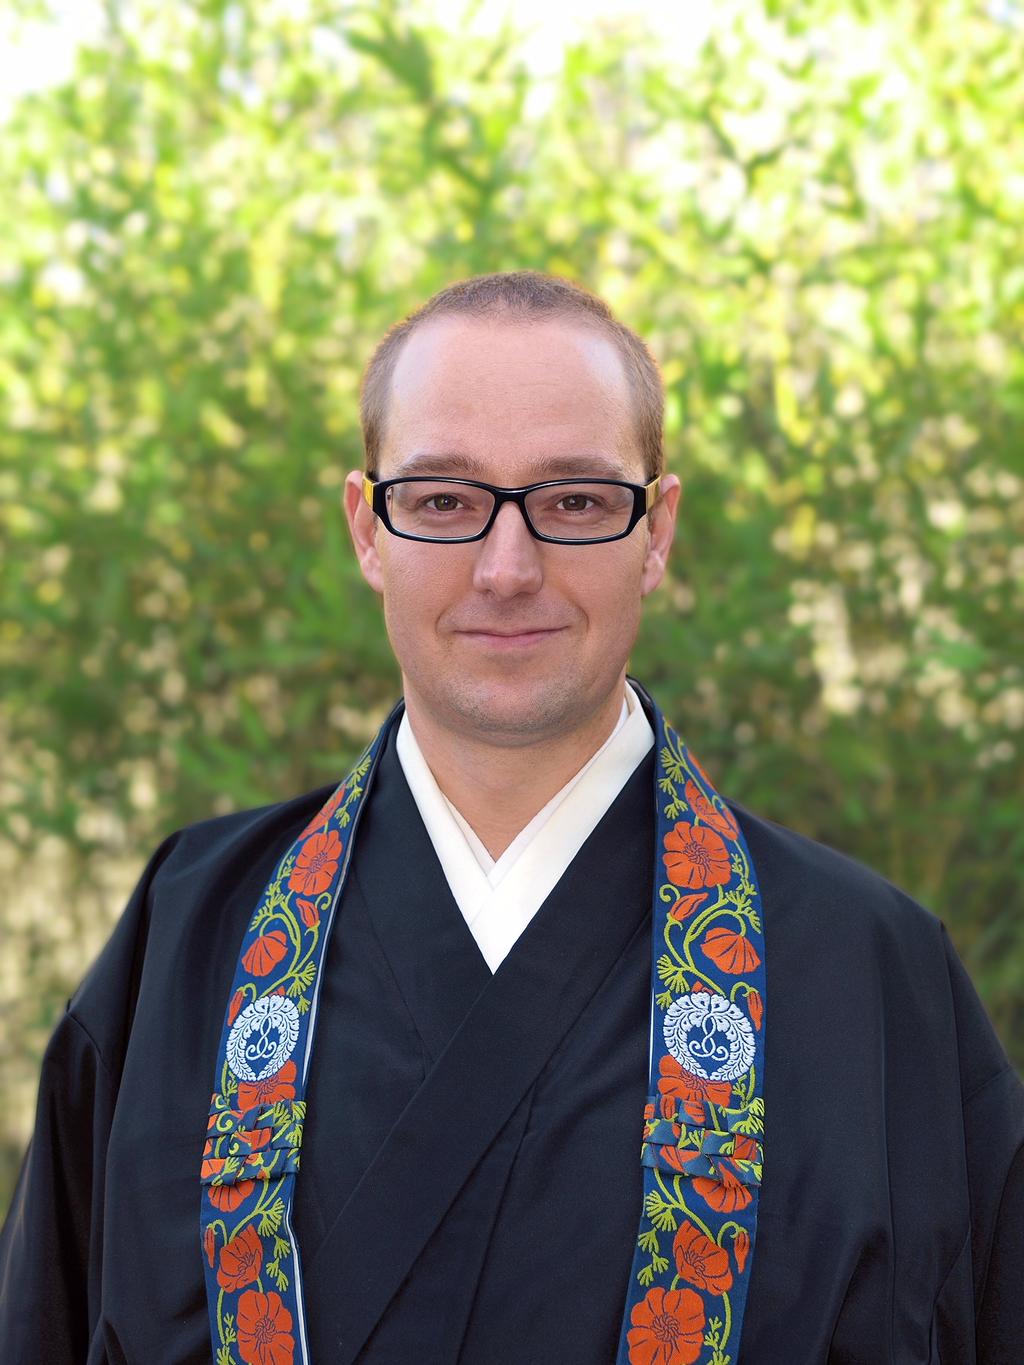 Speaker Bio: Rev. Henry Toryo Adams grew up in Buffalo, Minnesota. He discovered his interest in Buddhism during a one-year high school exchange program in Chennai, India in 1995-1996.